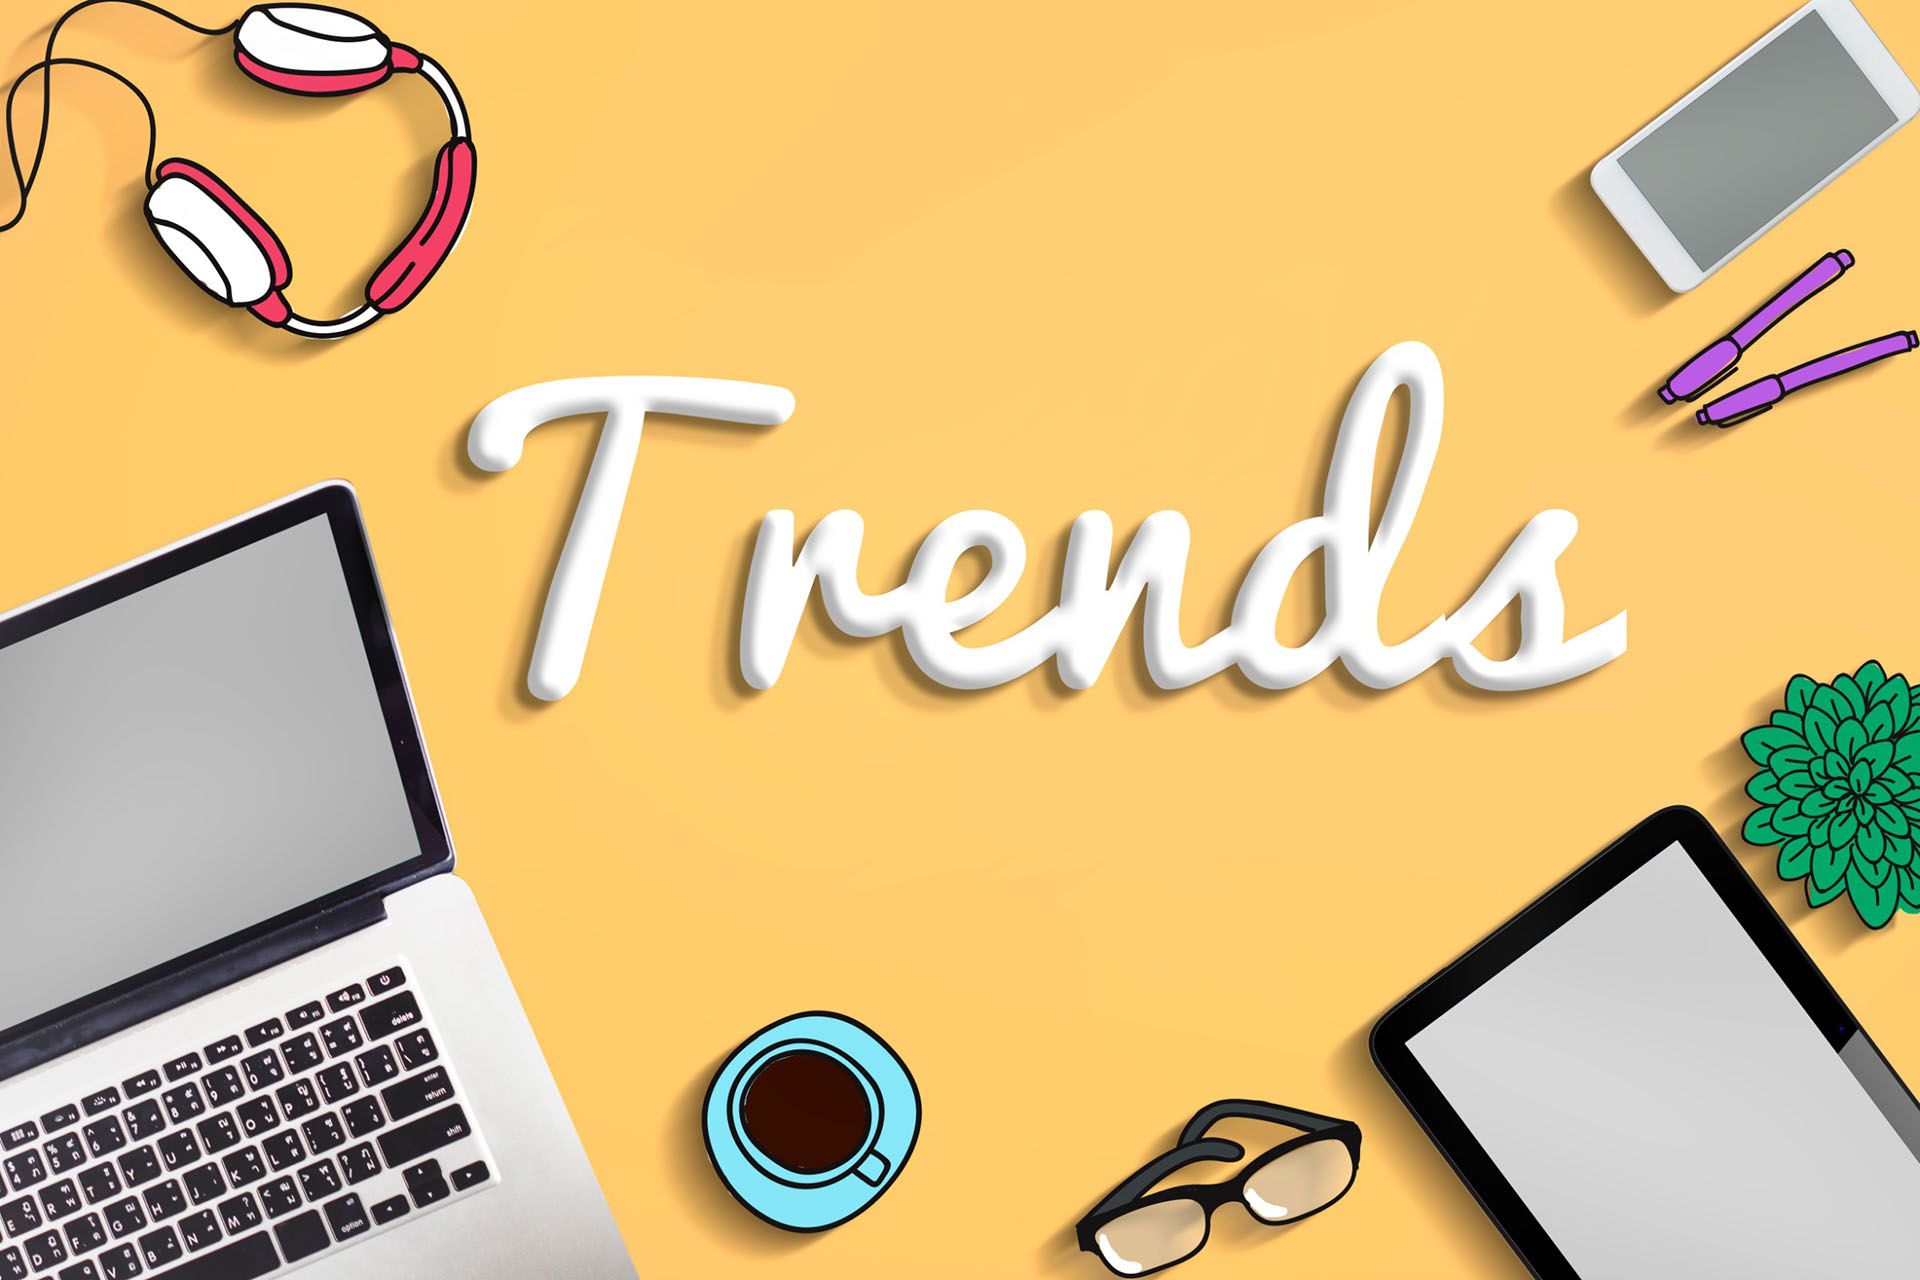 Word “trends” written in cursive next to animated images of headphones, a cup of coffee, glasses, an iPad, a cell phone, a plant, two pens, and a laptop.